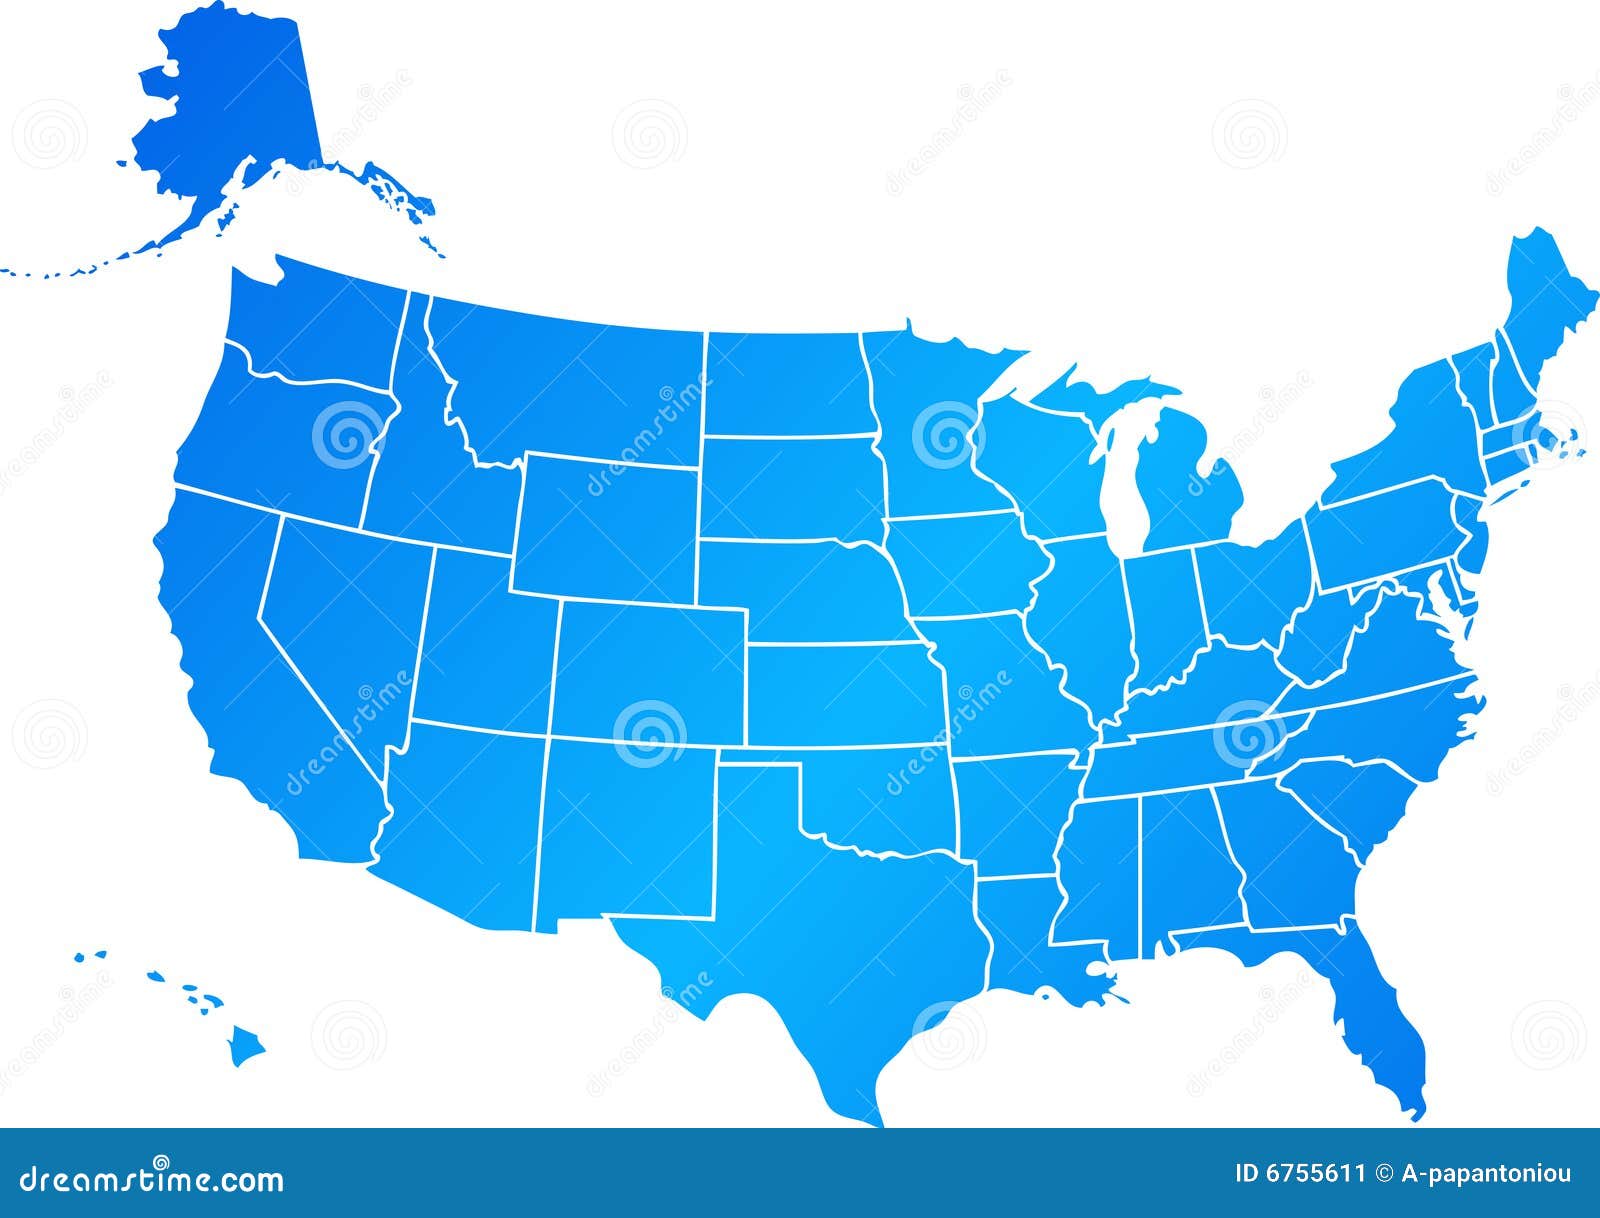 clipart map of usa - photo #46